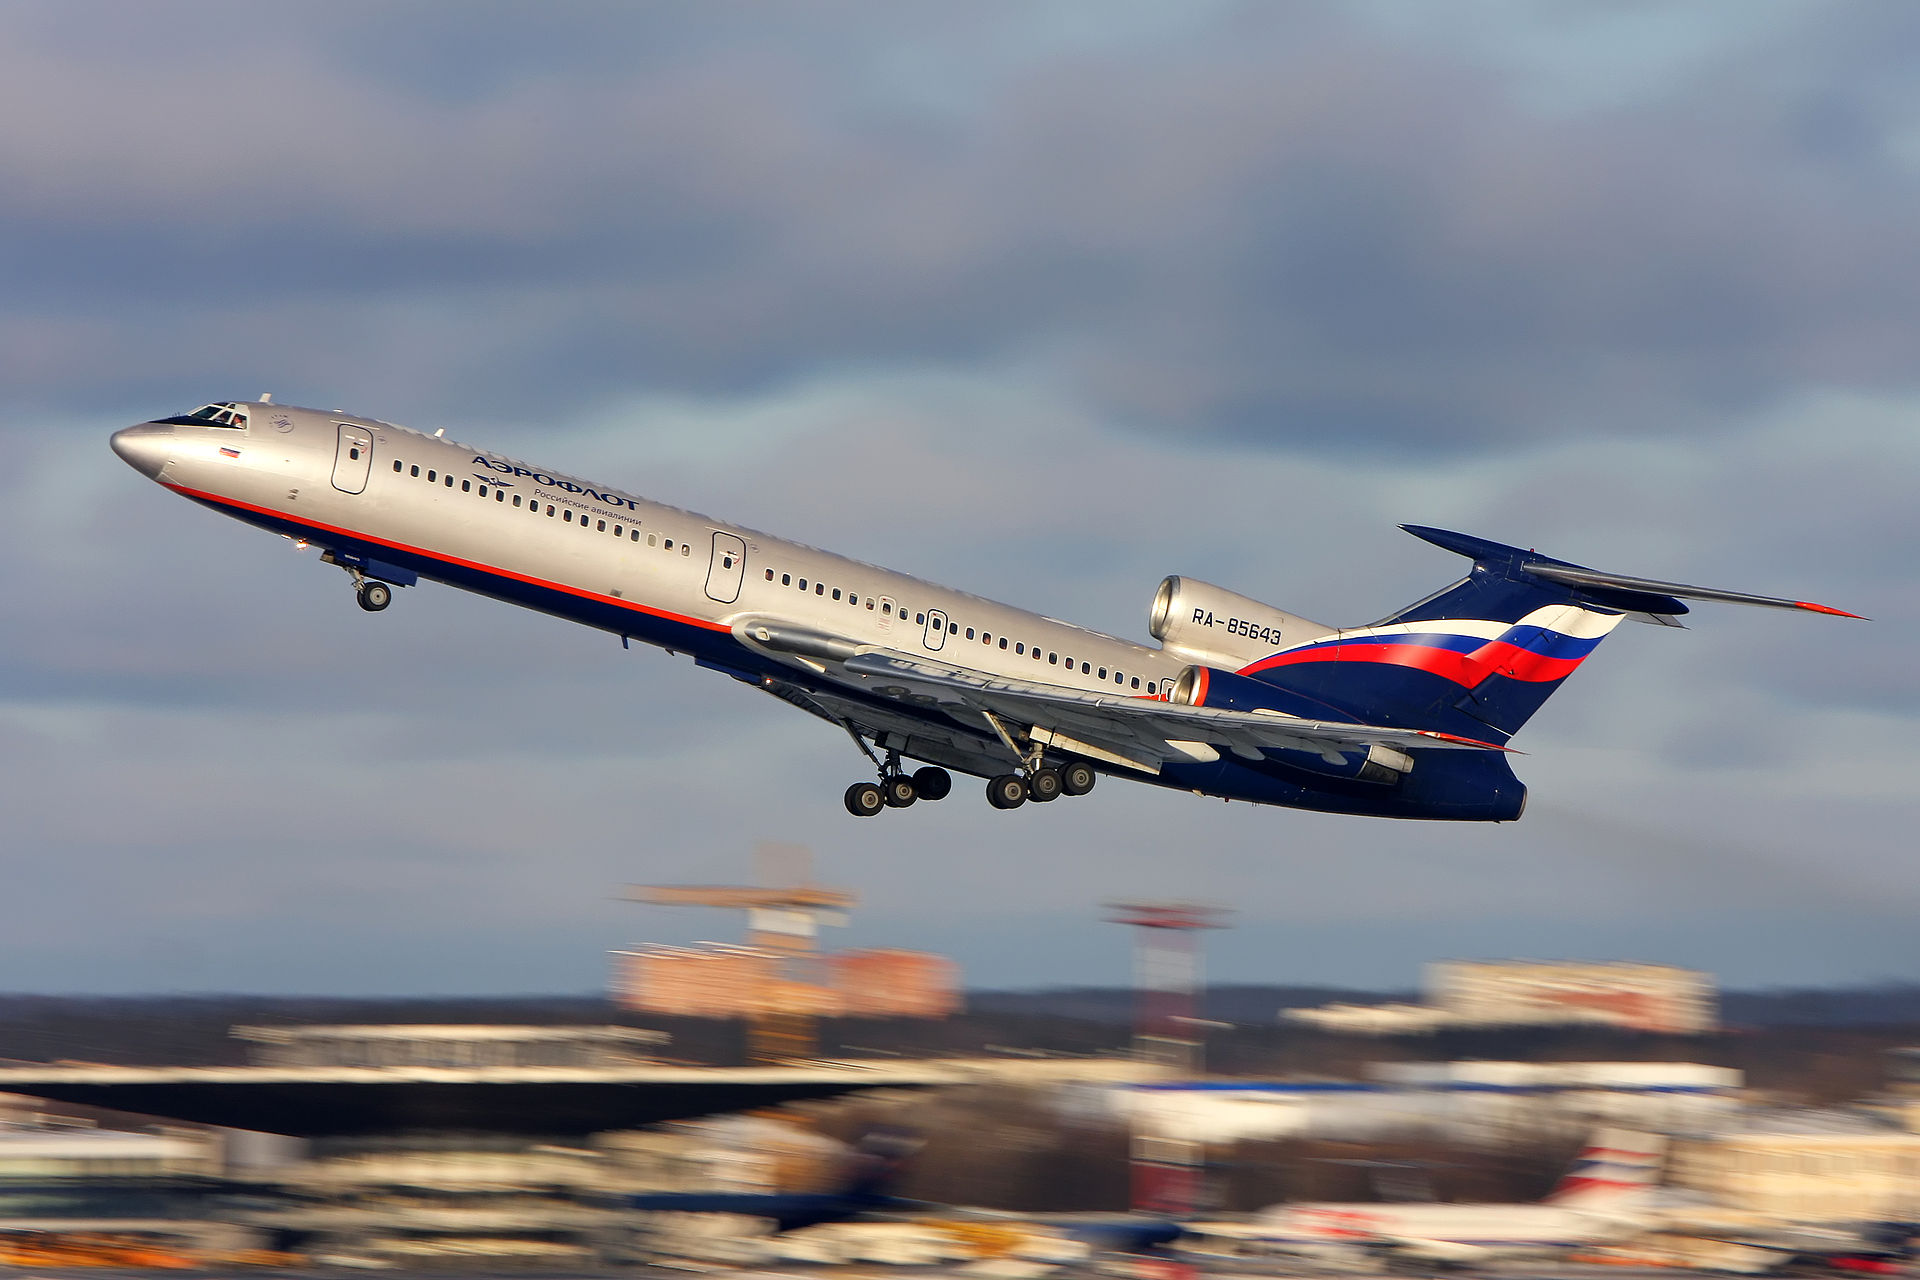 Tupolev 154 Reverses Power Before Touchdown